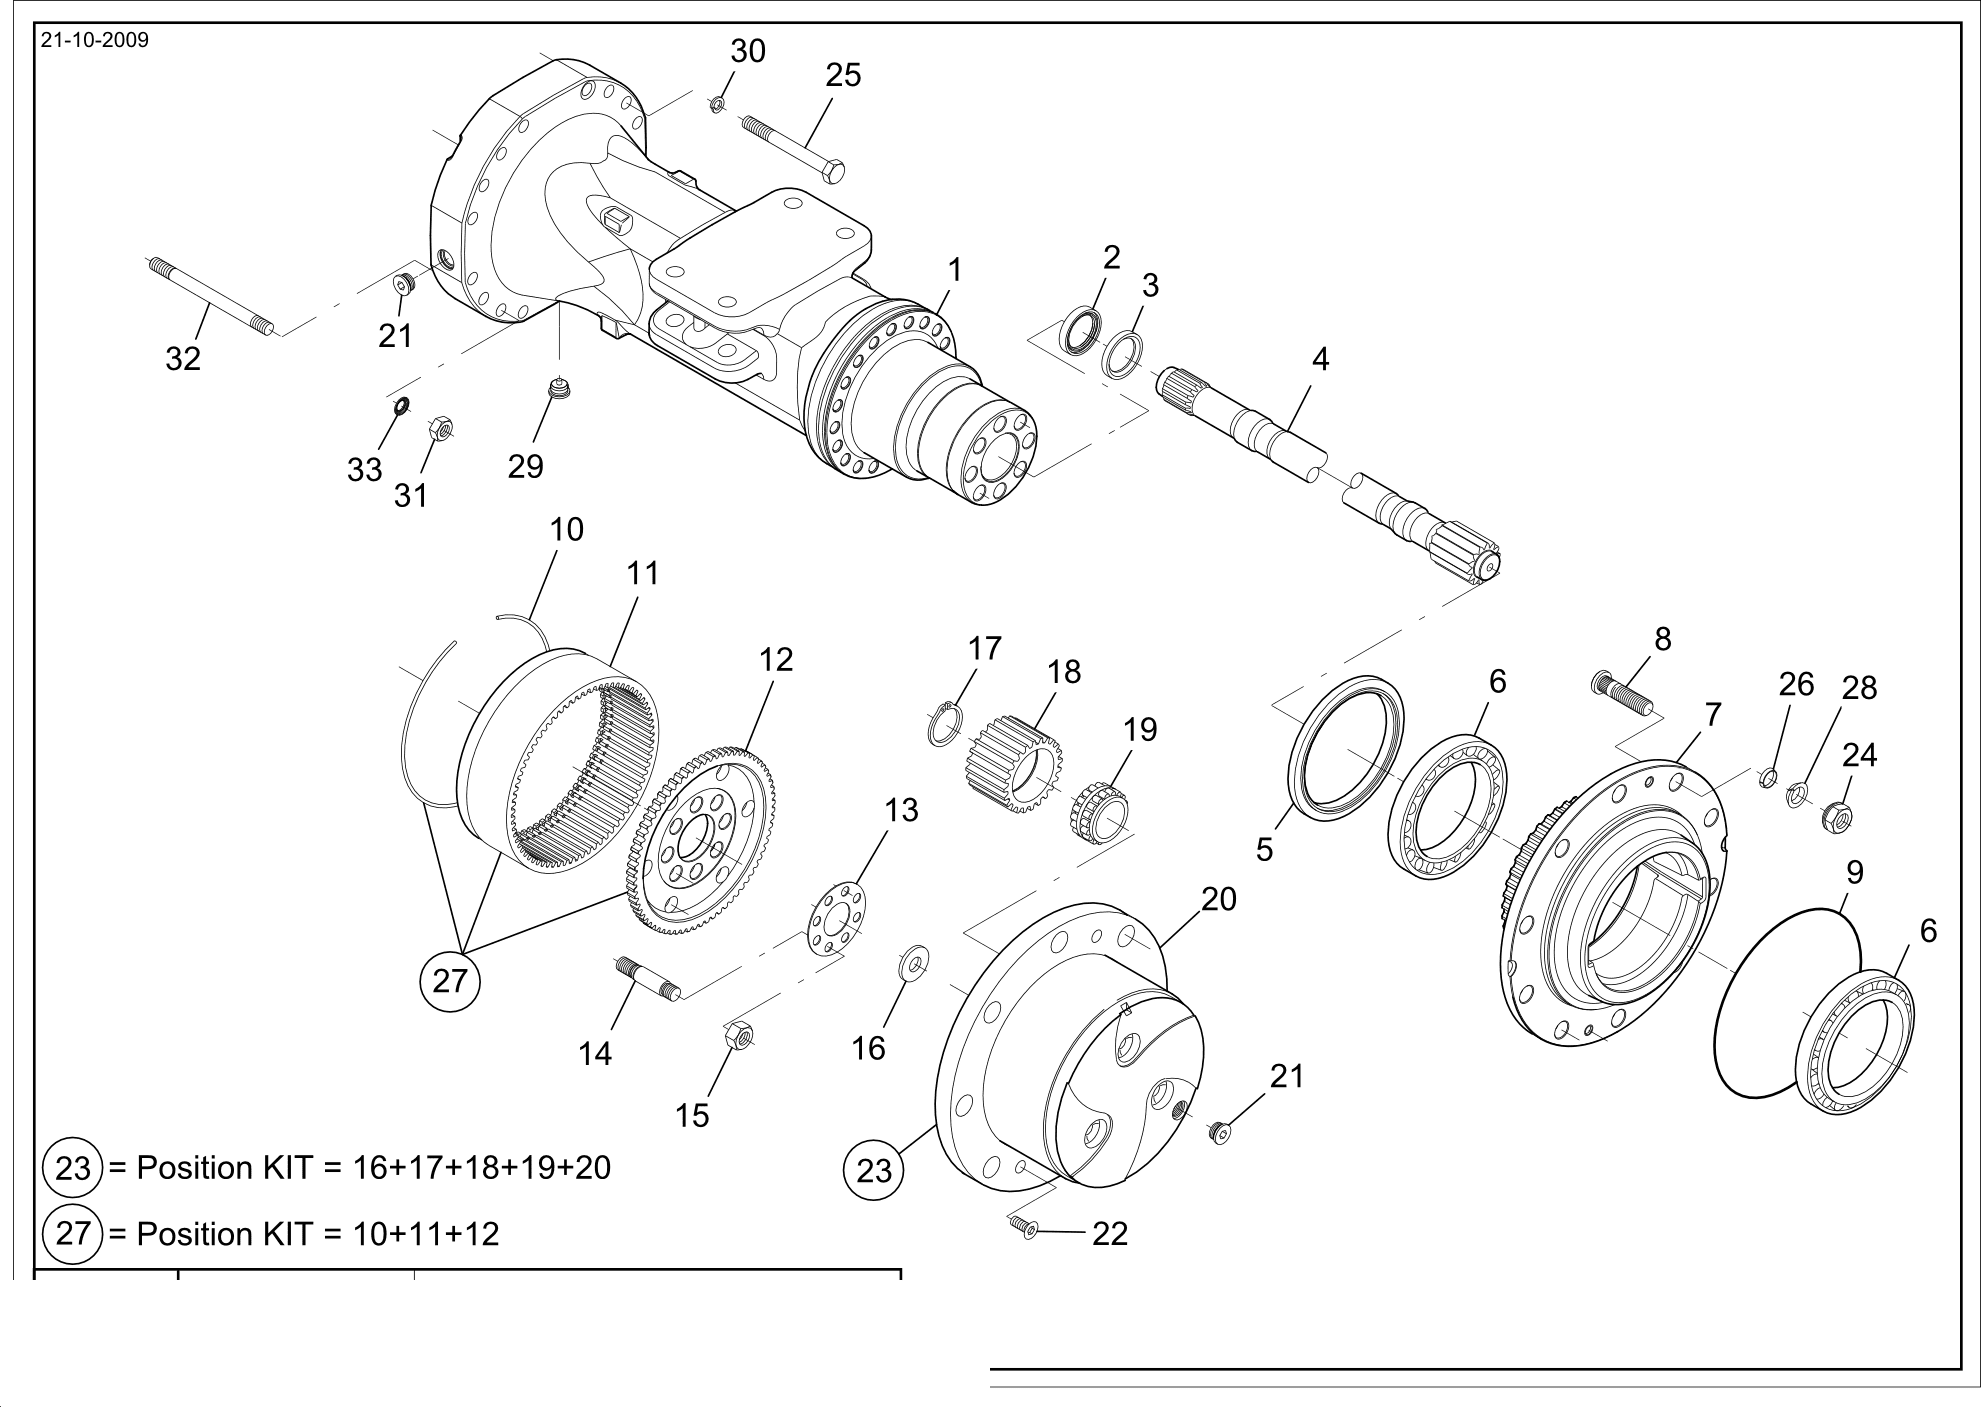 drawing for BRODERSON MANUFACTURING 055-00073 - NUT (figure 5)